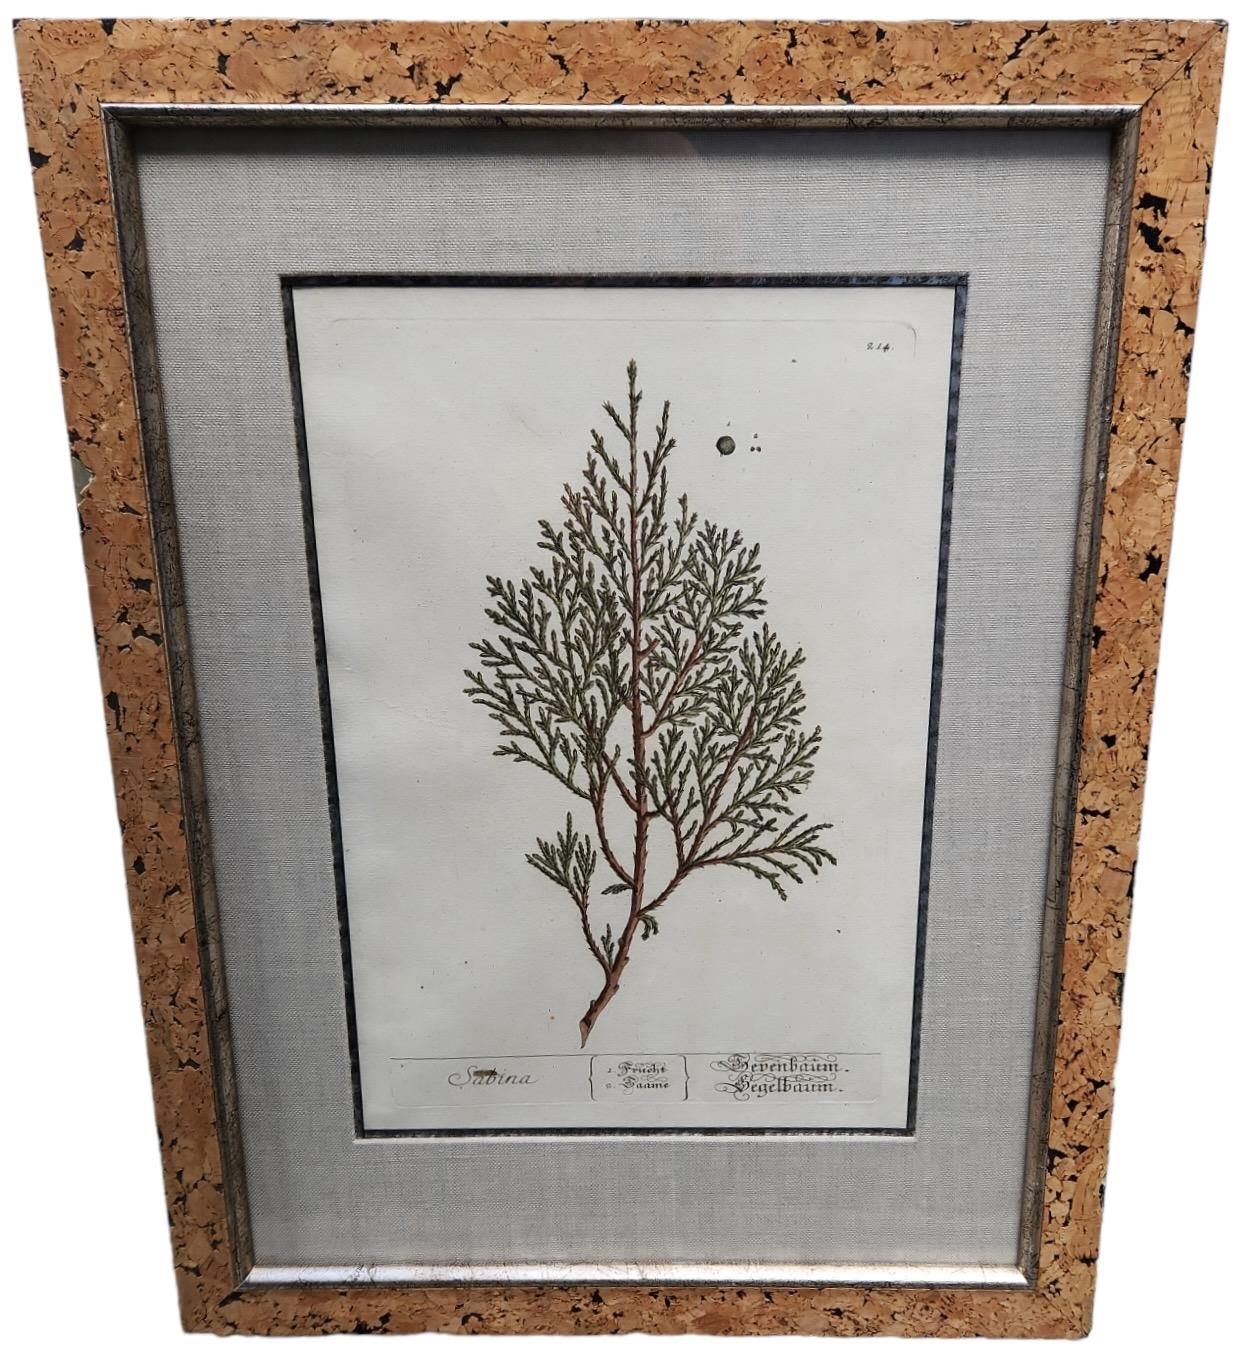 Neoclassical 18th Century Elizabeth Blackwell Hand Tinted Botanicals - 12 Available For Sale